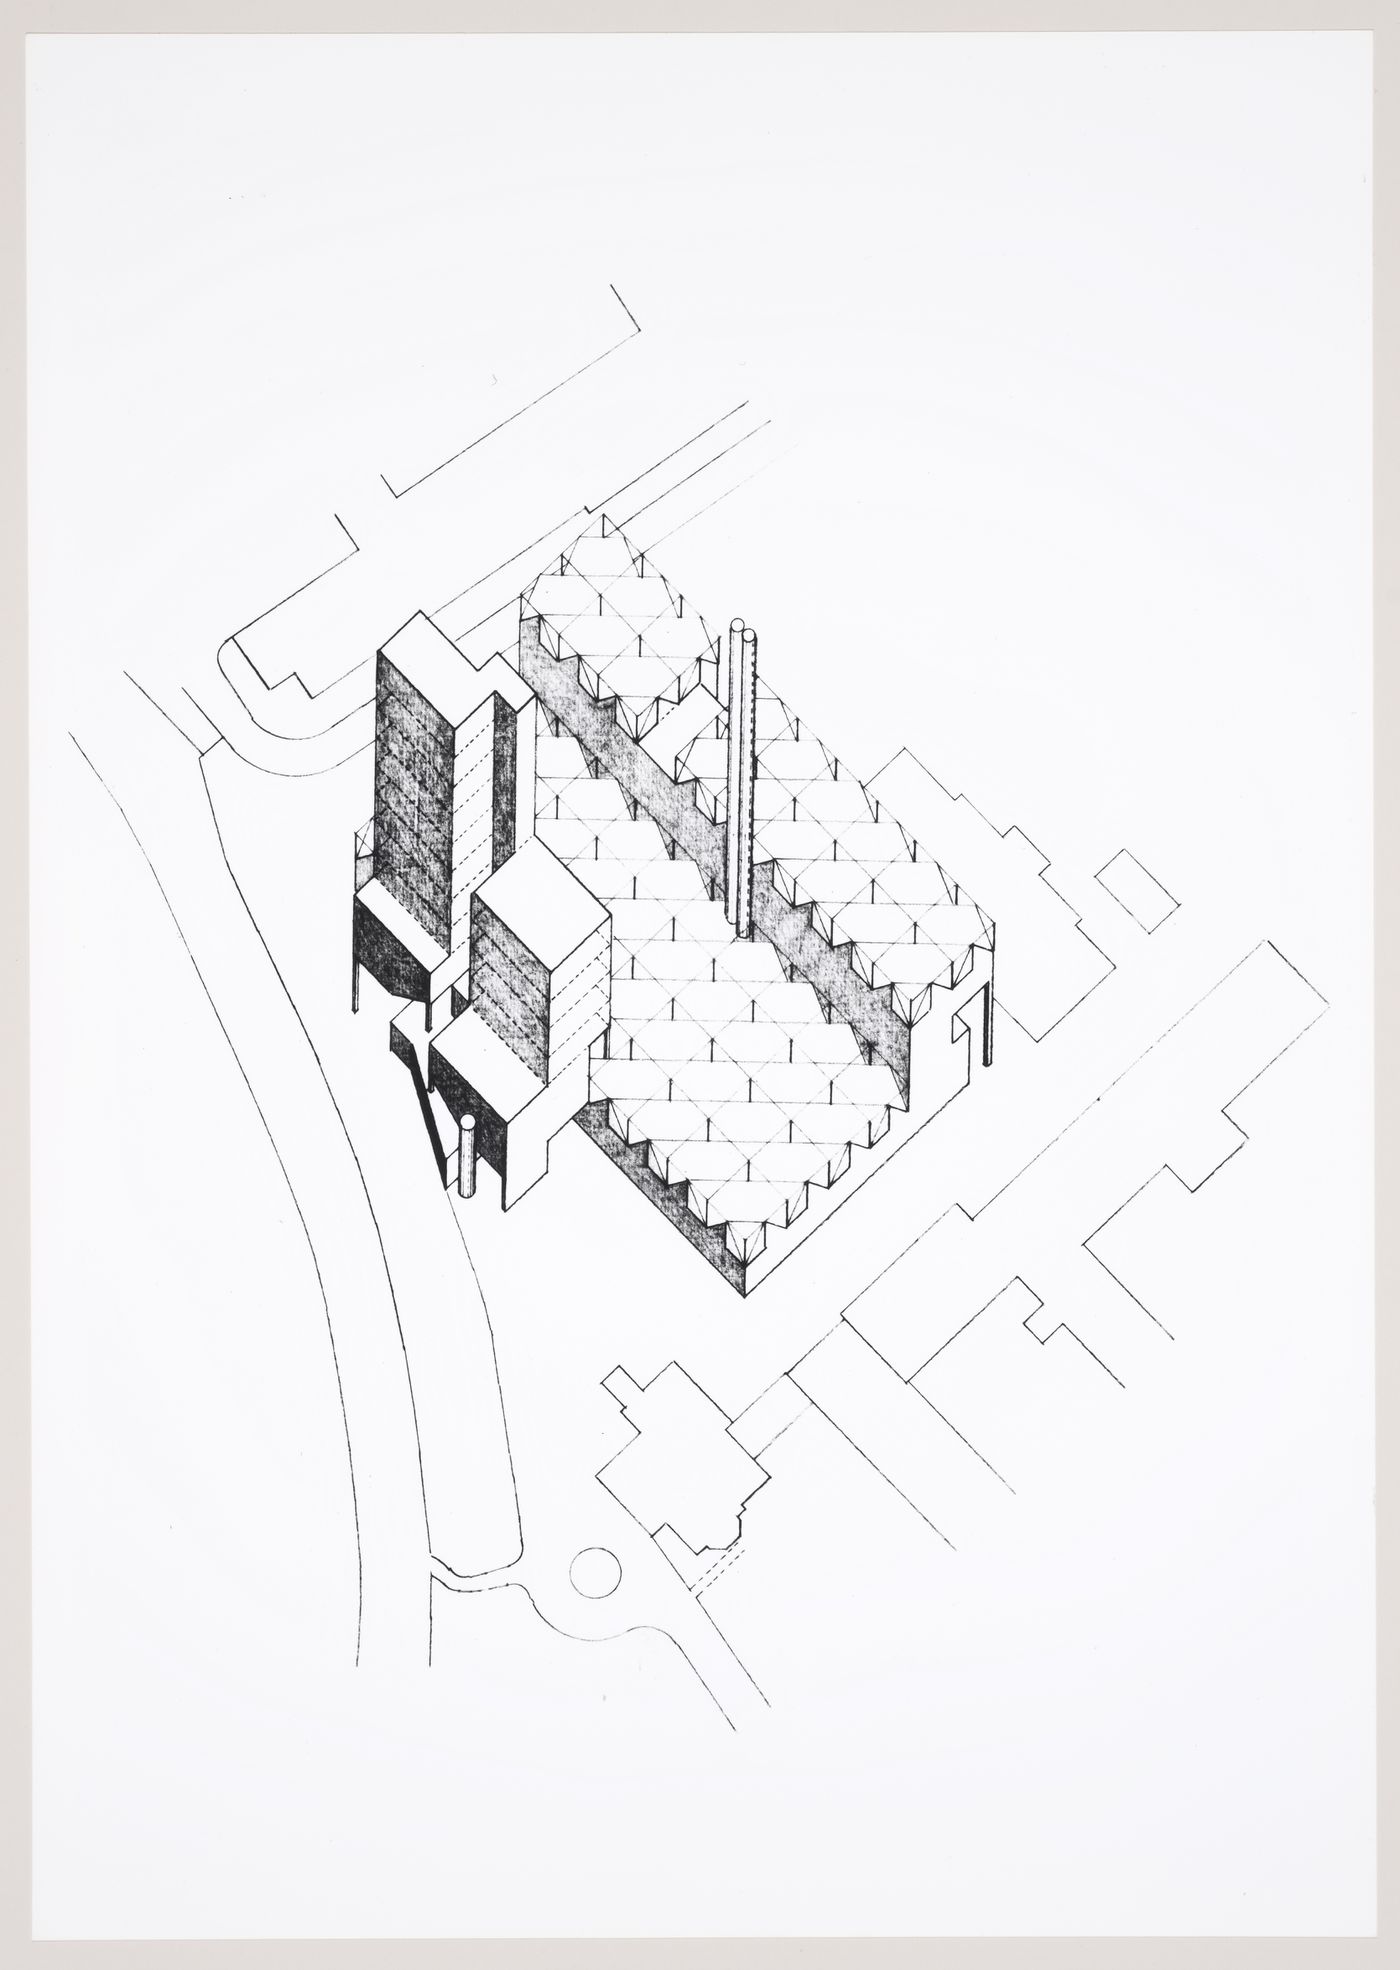 Leicester University Engineering Building, Leicester, England: view of an axonometric